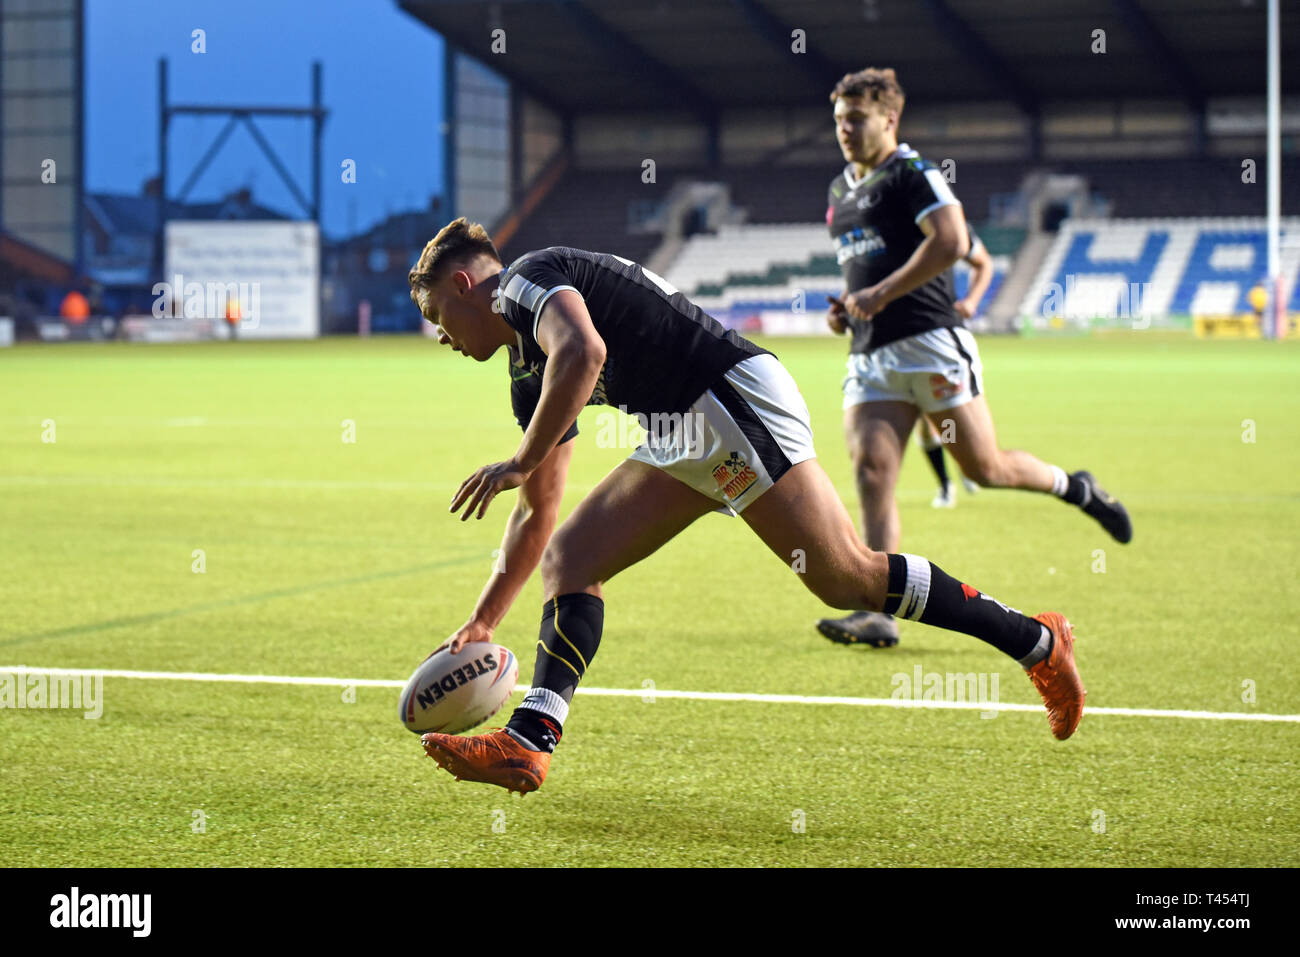 Halton Stadium, Widnes, UK. 13th Apr, 2019. Coral Challenge Cup rugby, Widnes Vikings versus York City Knights; Keanan Brand of the Widnes Vikings scores a try to make the score 16 - 6 Credit: Action Plus Sports/Alamy Live News Stock Photo